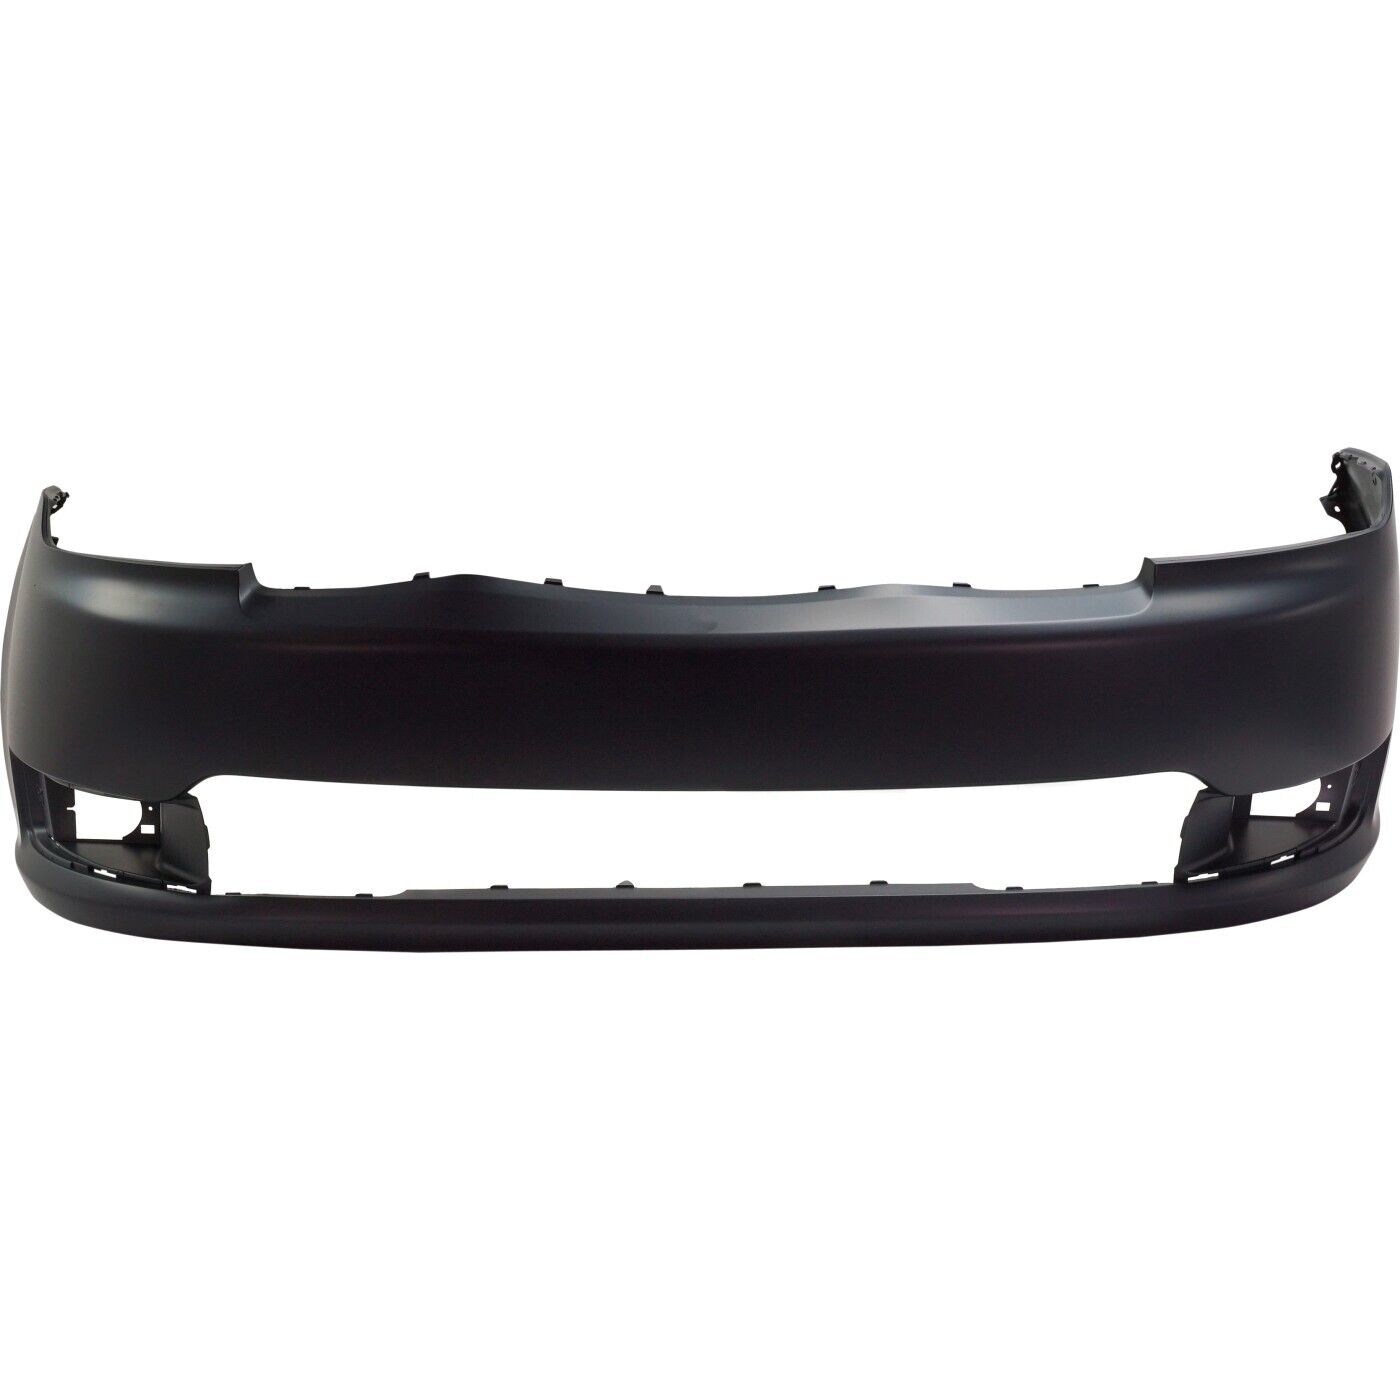 NEW Primed - Front Bumper Cover Replacement for 2013-2018 Ford Flex SUV 13-18